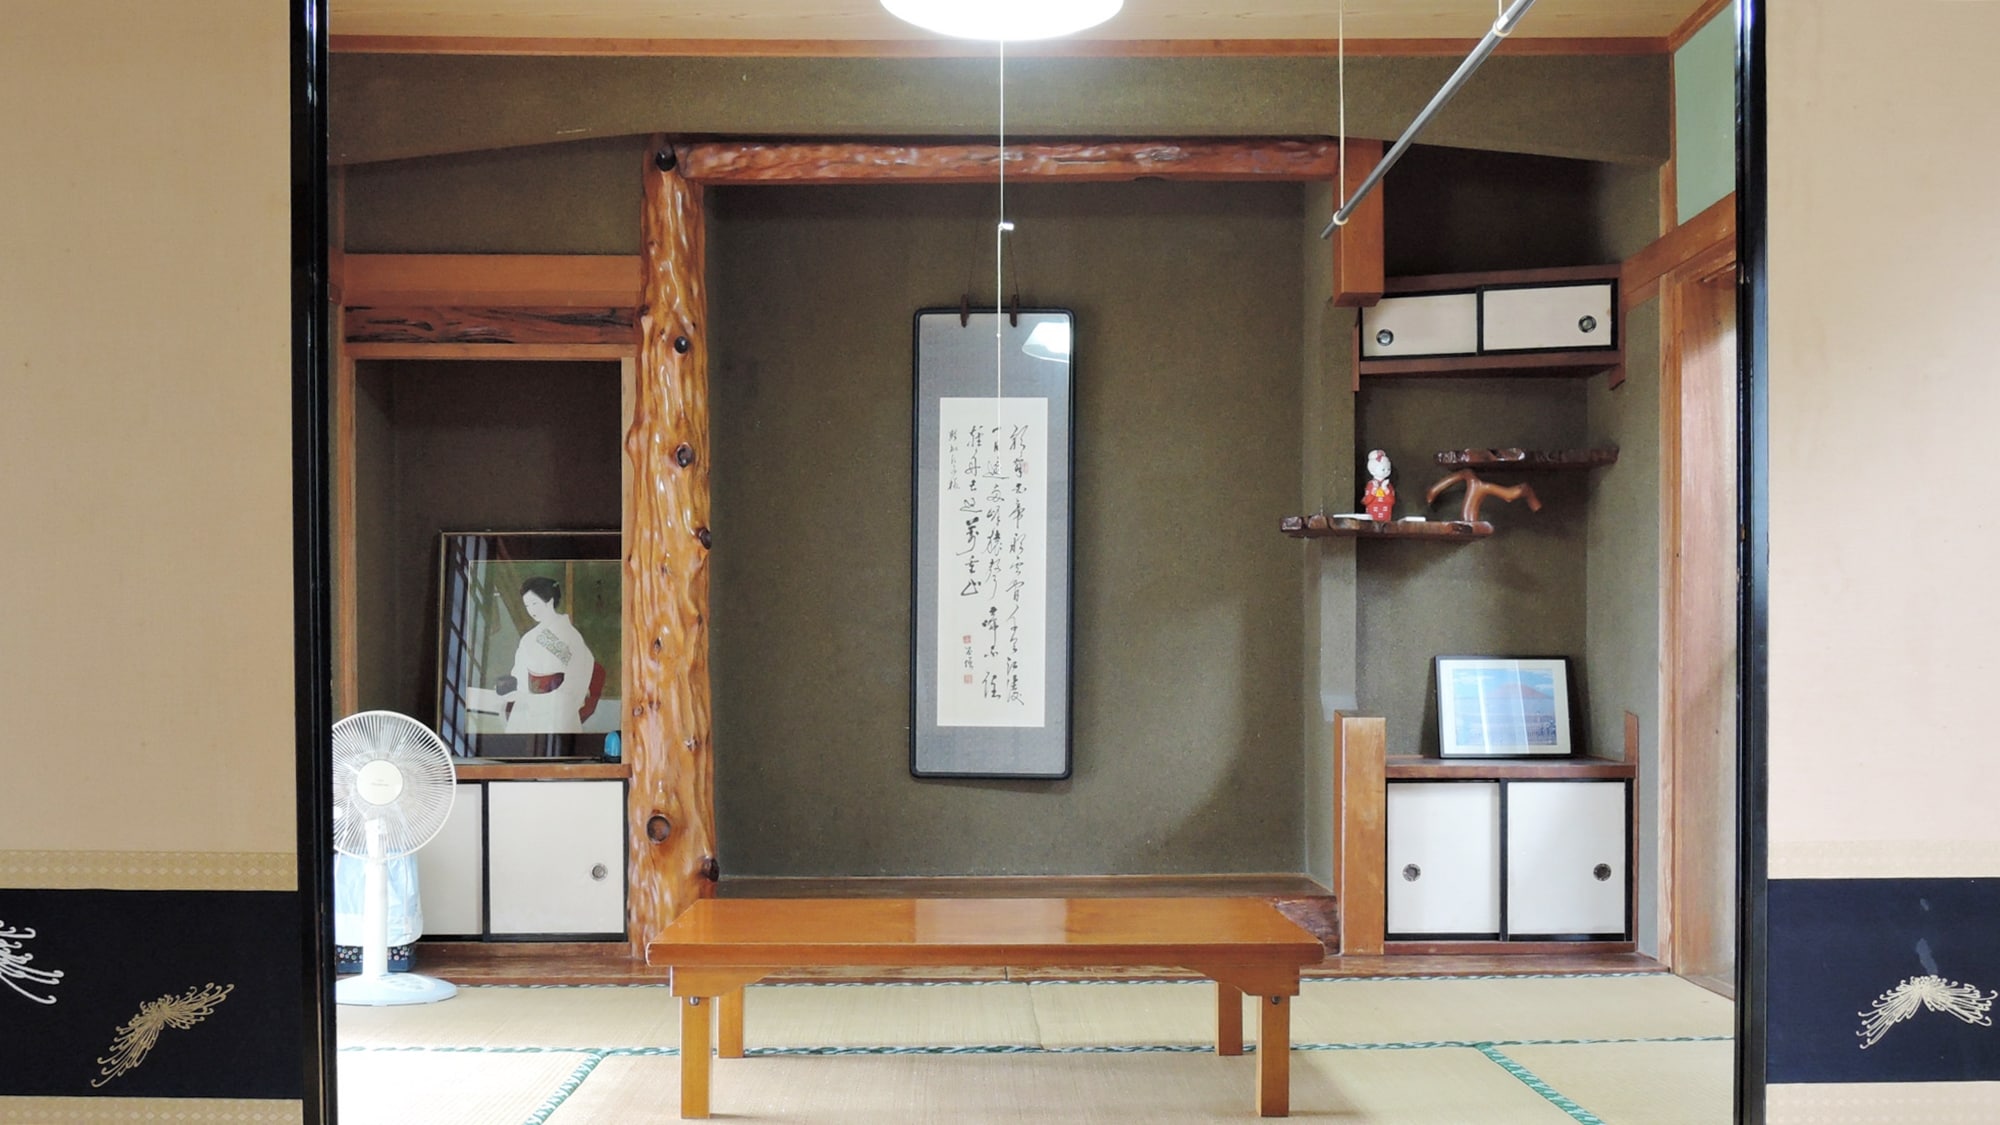 * Example of a Japanese-style room with 12 tatami mats / A wide rim through which light can enter.